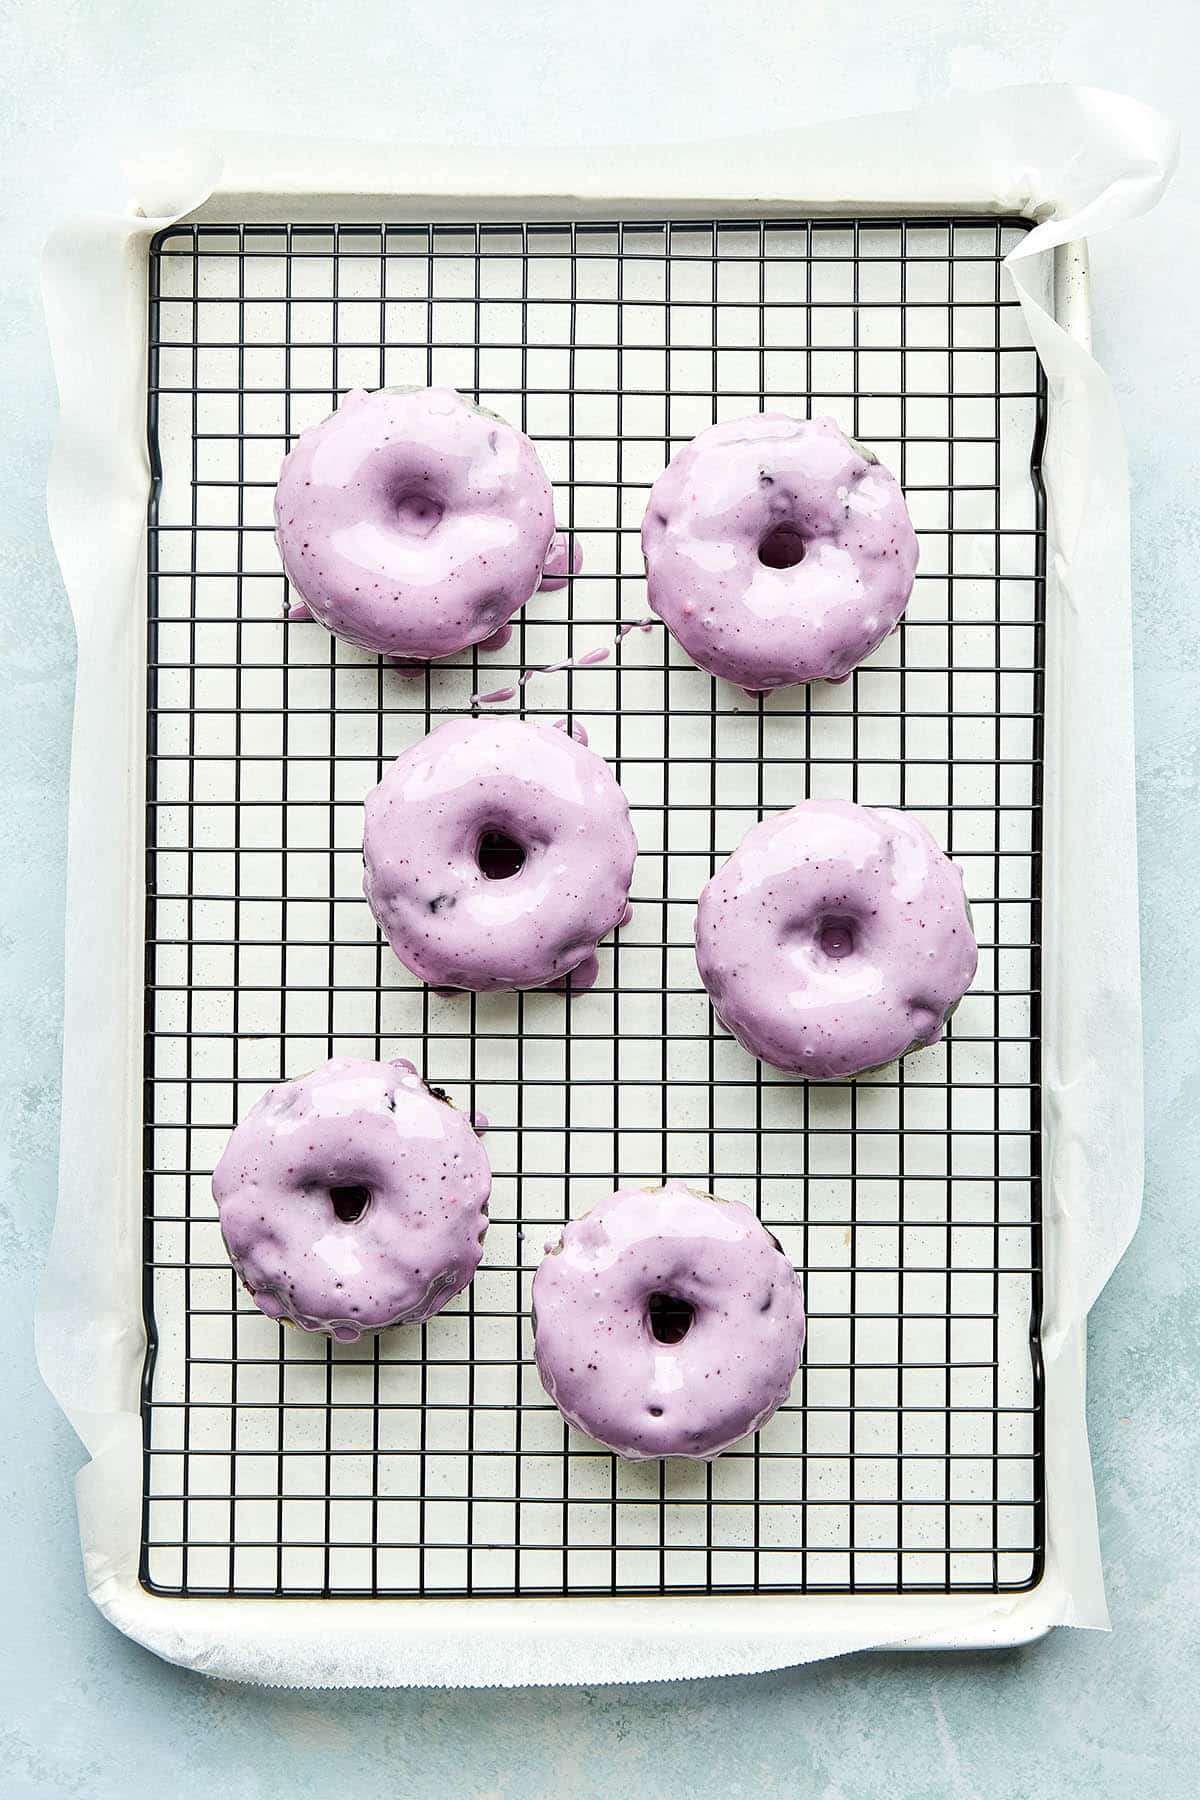 Baked blueberry donuts cooling on a wire rack set inside a parchment lined baking sheet.